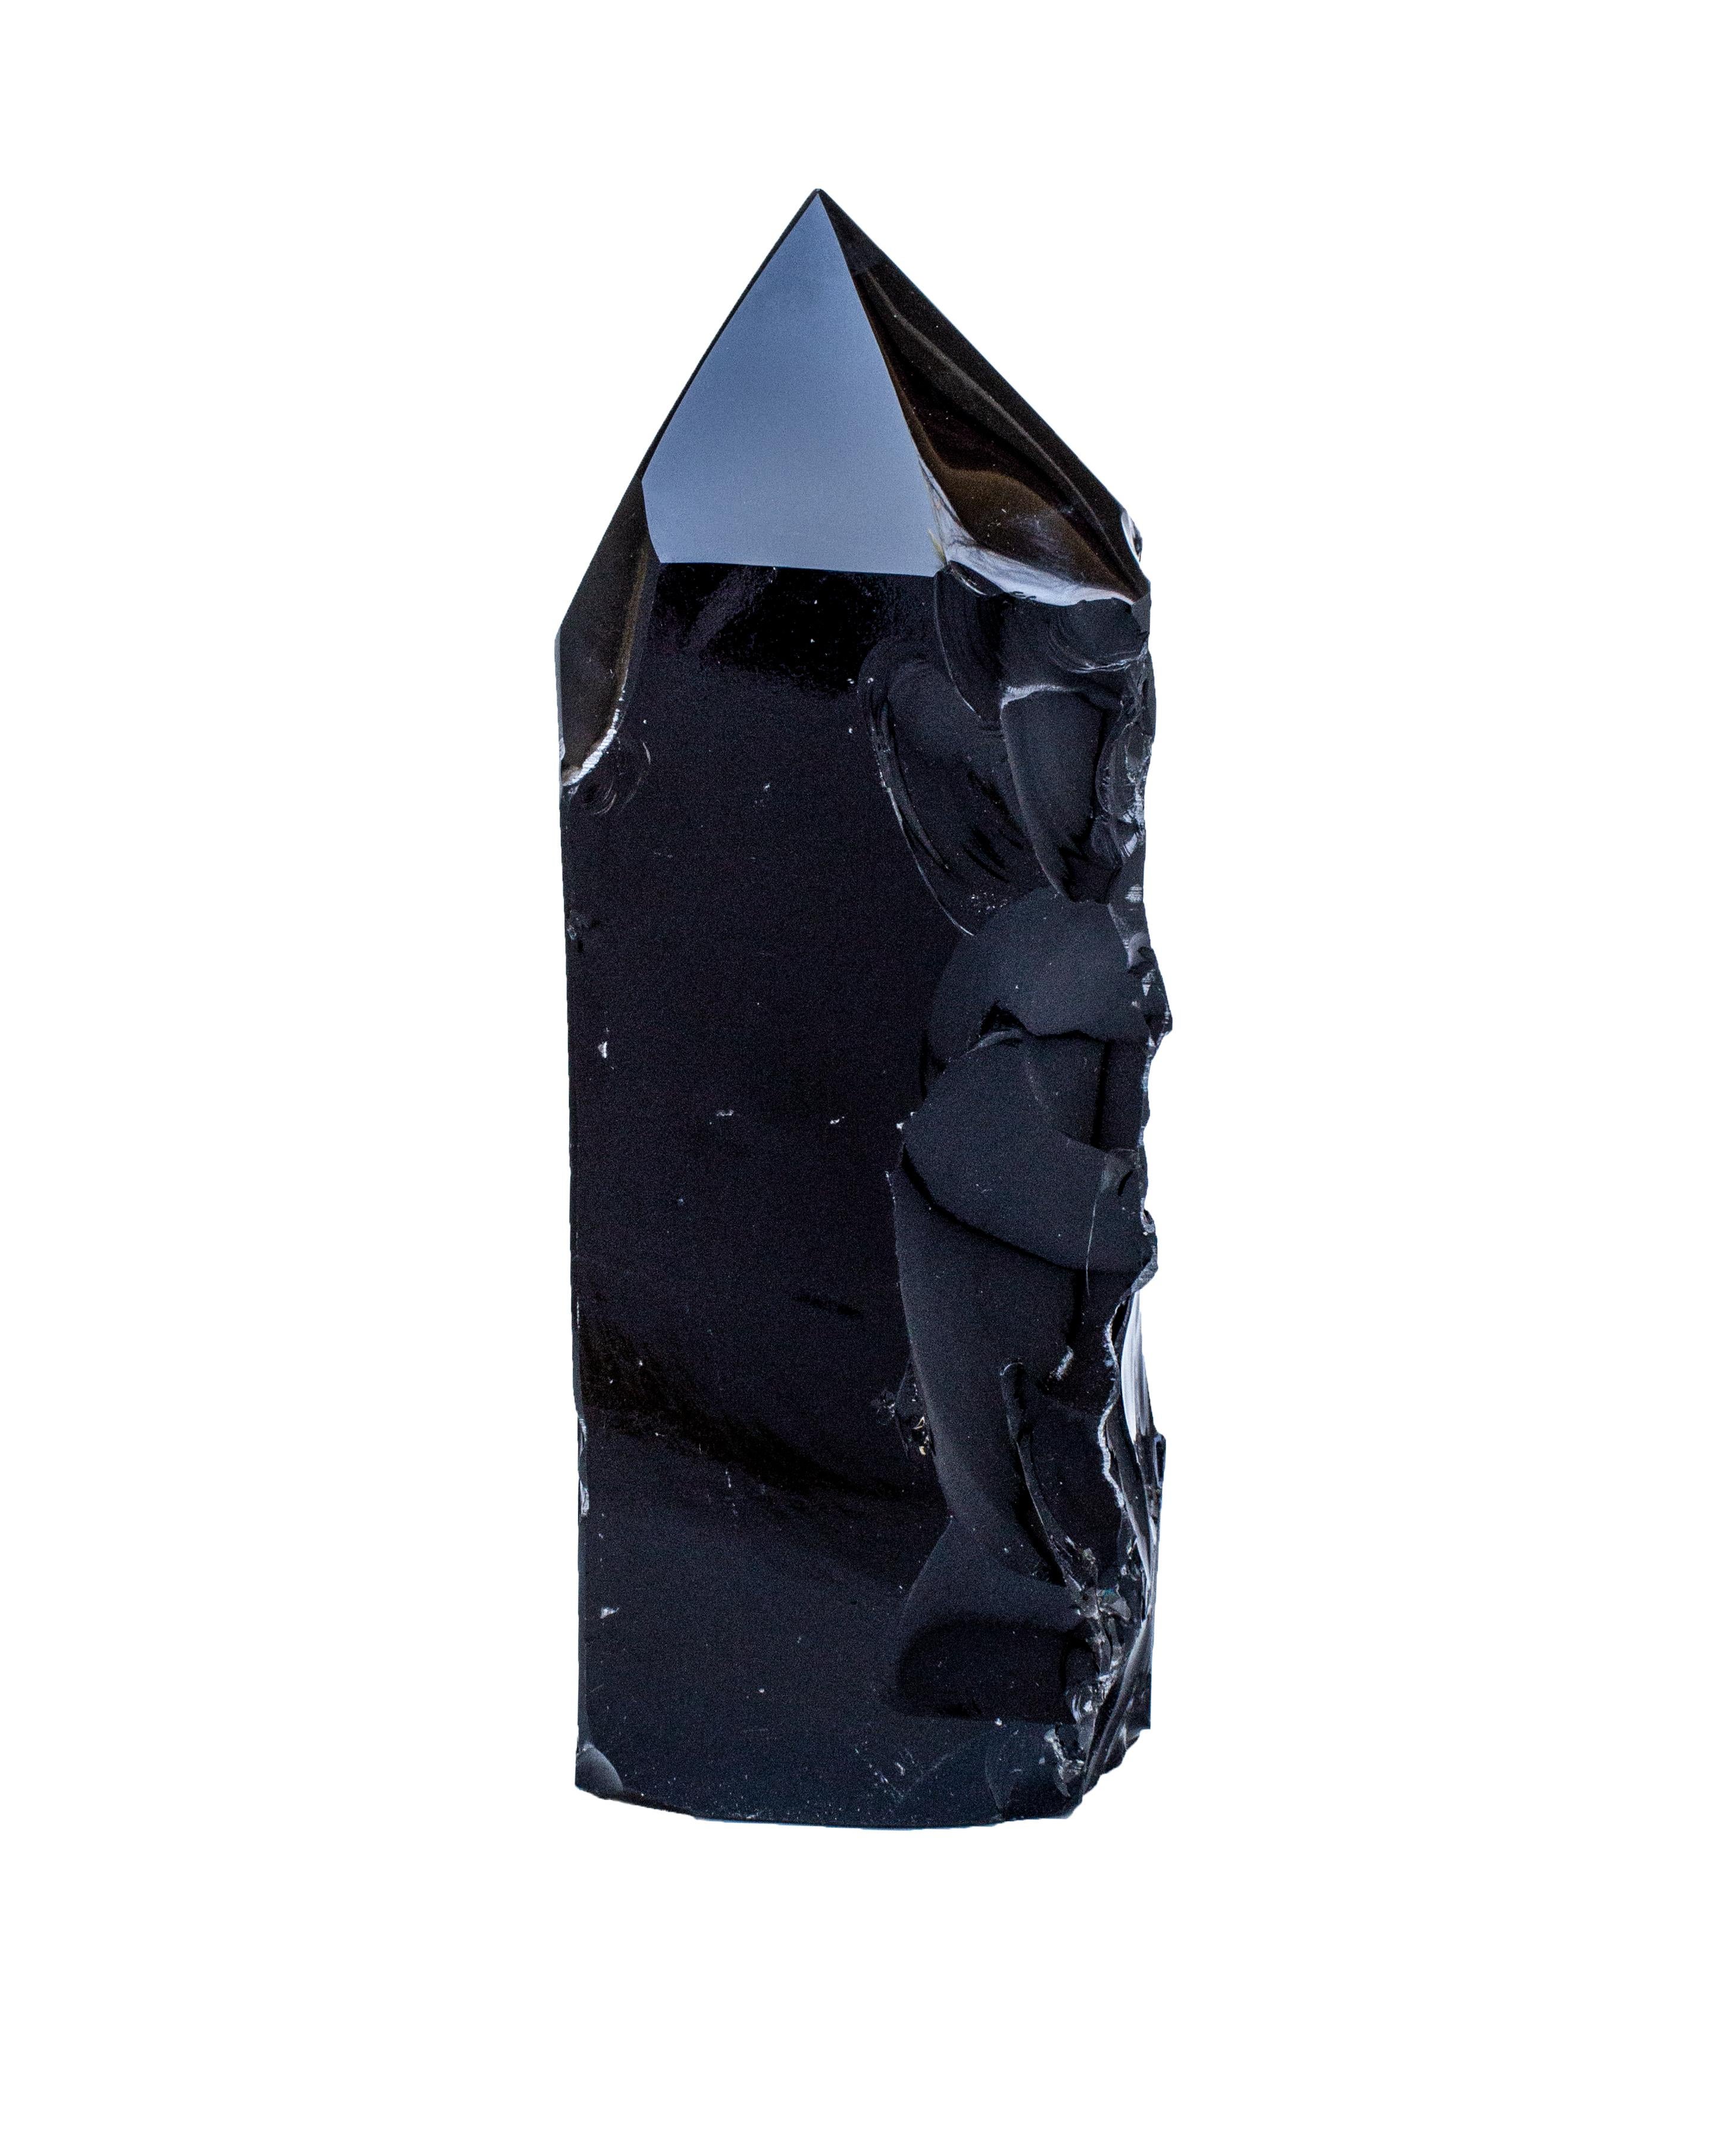 Polished black obsidian point with natural forming indentions. The point was cut and polished to completion, but parts of this piece are left in its organic form to resemble a natural forming sculpture combined with the hand of man. 

Obsidian is a